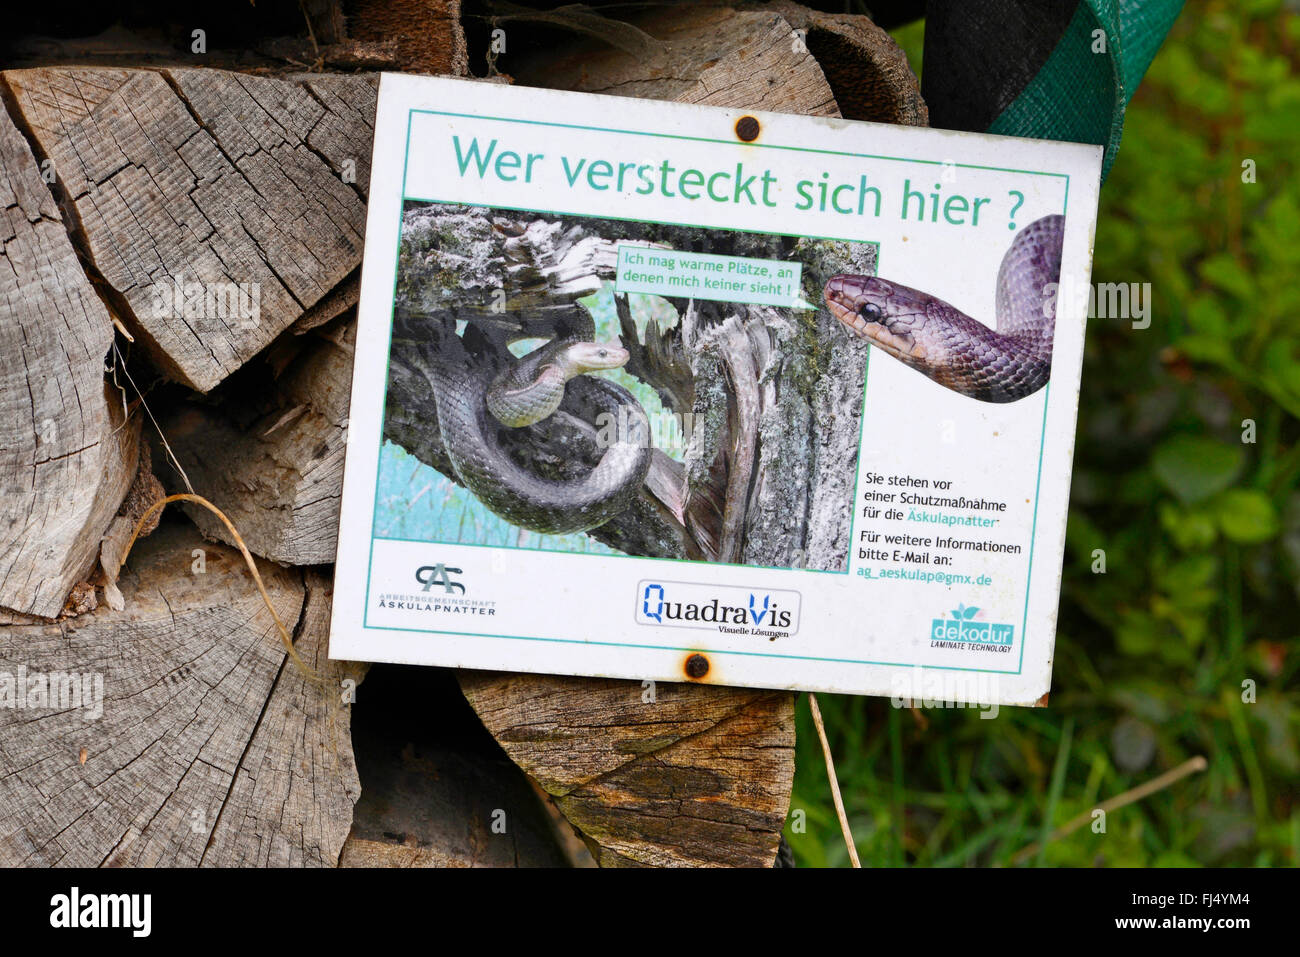 Aesculapian snake (Elaphe longissima, Zamenis longissimus), information signs of a protection project for the Aesculapian snake, Germany, Odenwald, Hirschhorn am Neckar Stock Photo